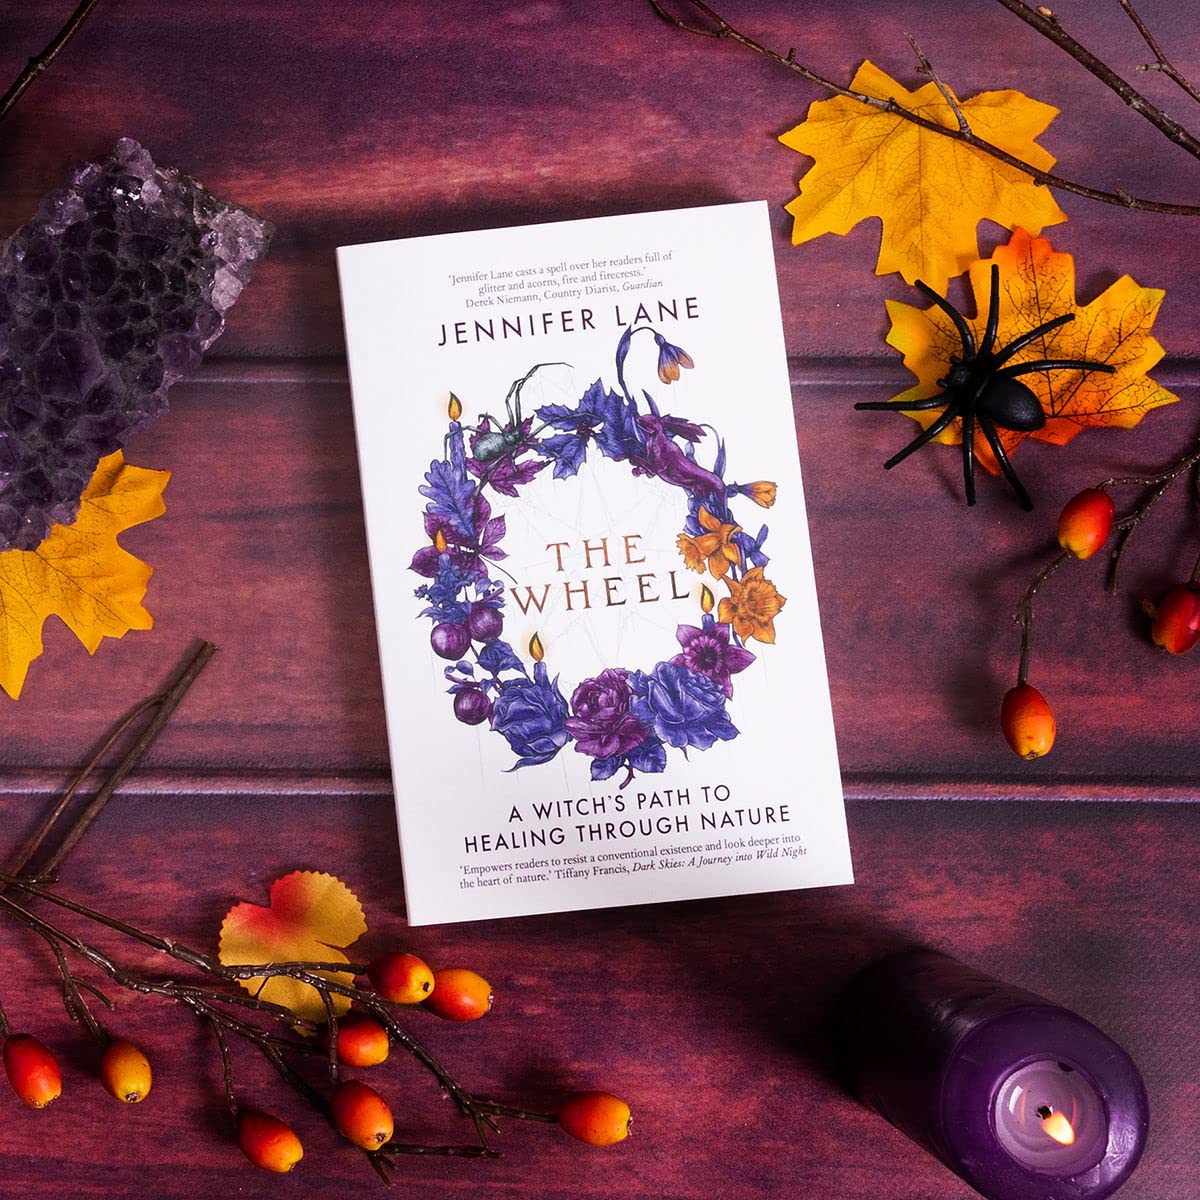 The Wheel : A Witch's Path to Healing Through Nature by Jennifer lane